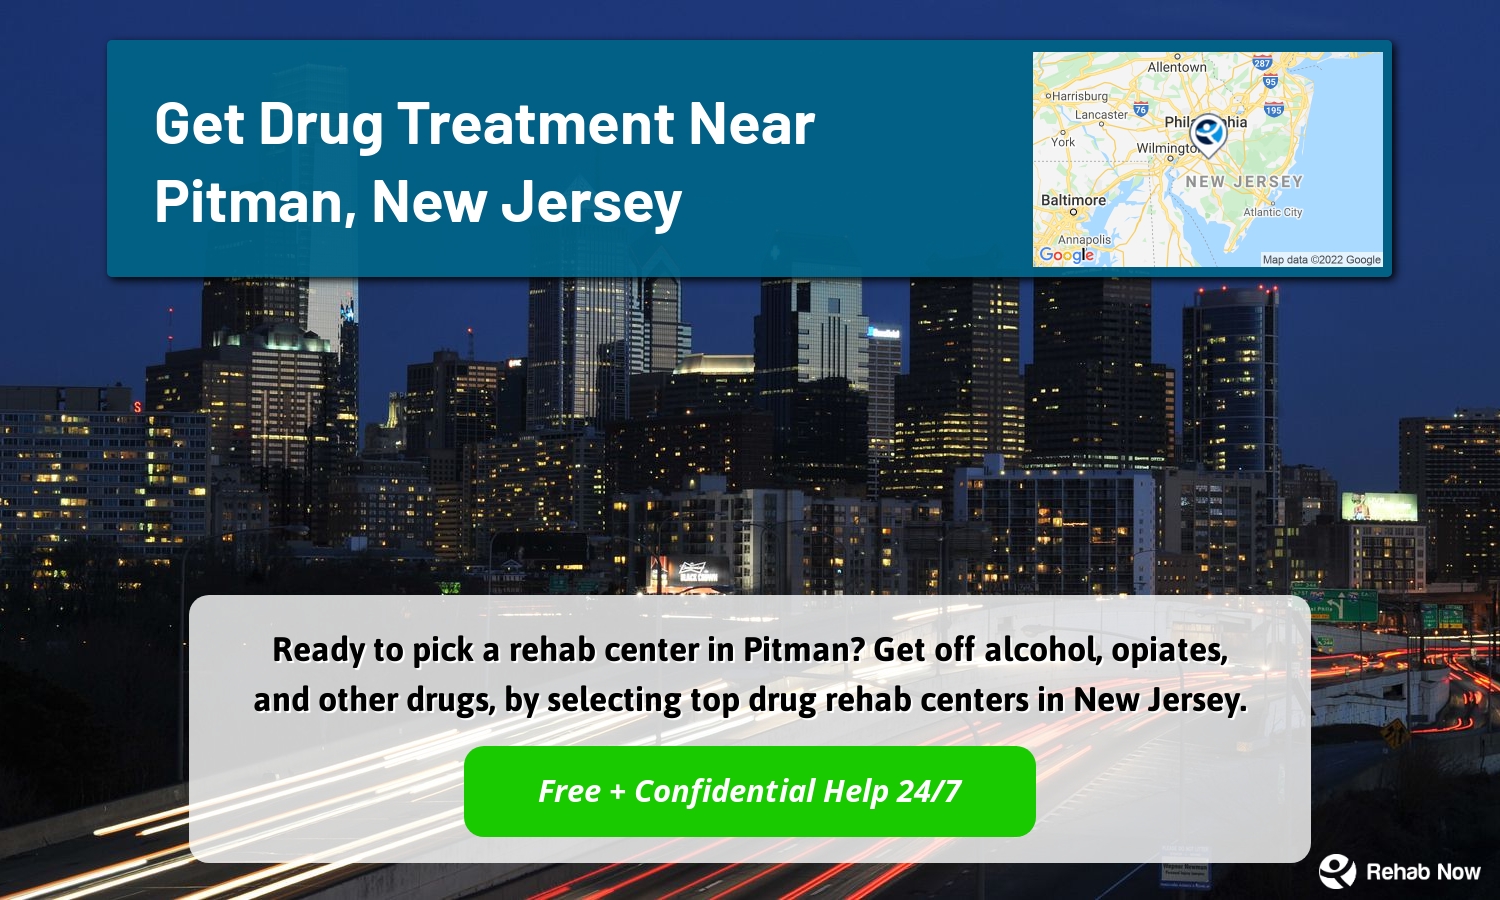 Ready to pick a rehab center in Pitman? Get off alcohol, opiates, and other drugs, by selecting top drug rehab centers in New Jersey.